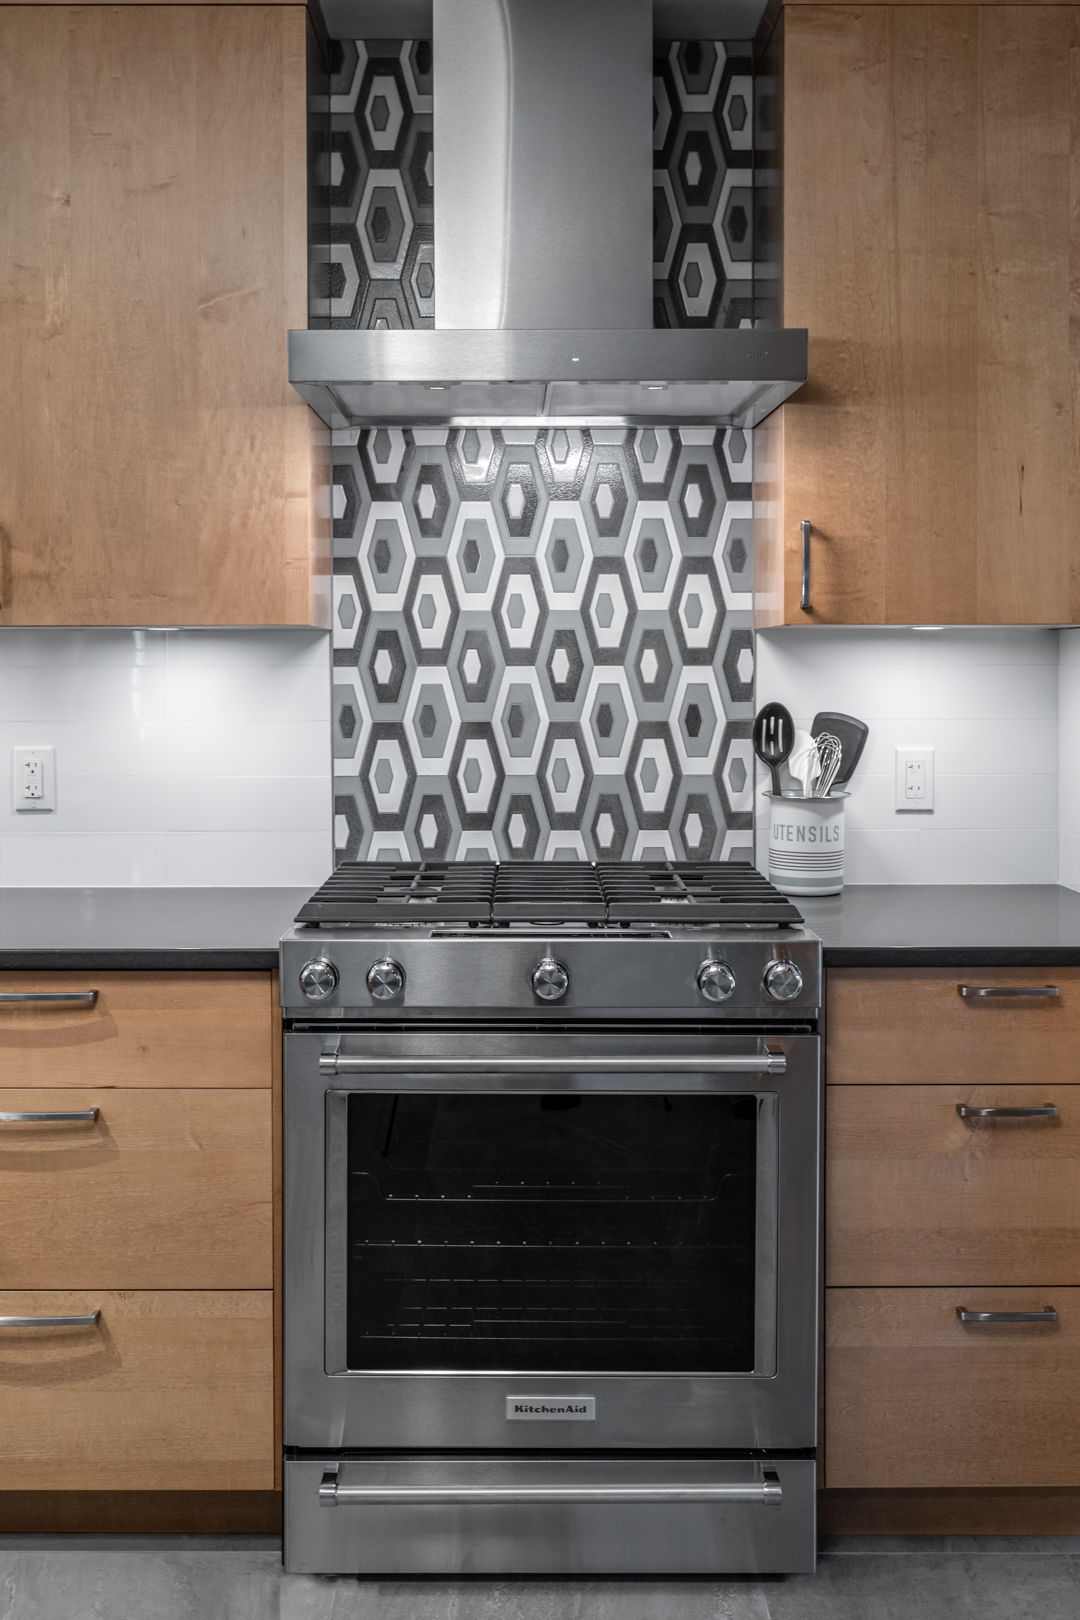 Modern kitchen with wooden cabinetry, stainless steel gas range, and vintage-inspired geometric patterned stove backsplash